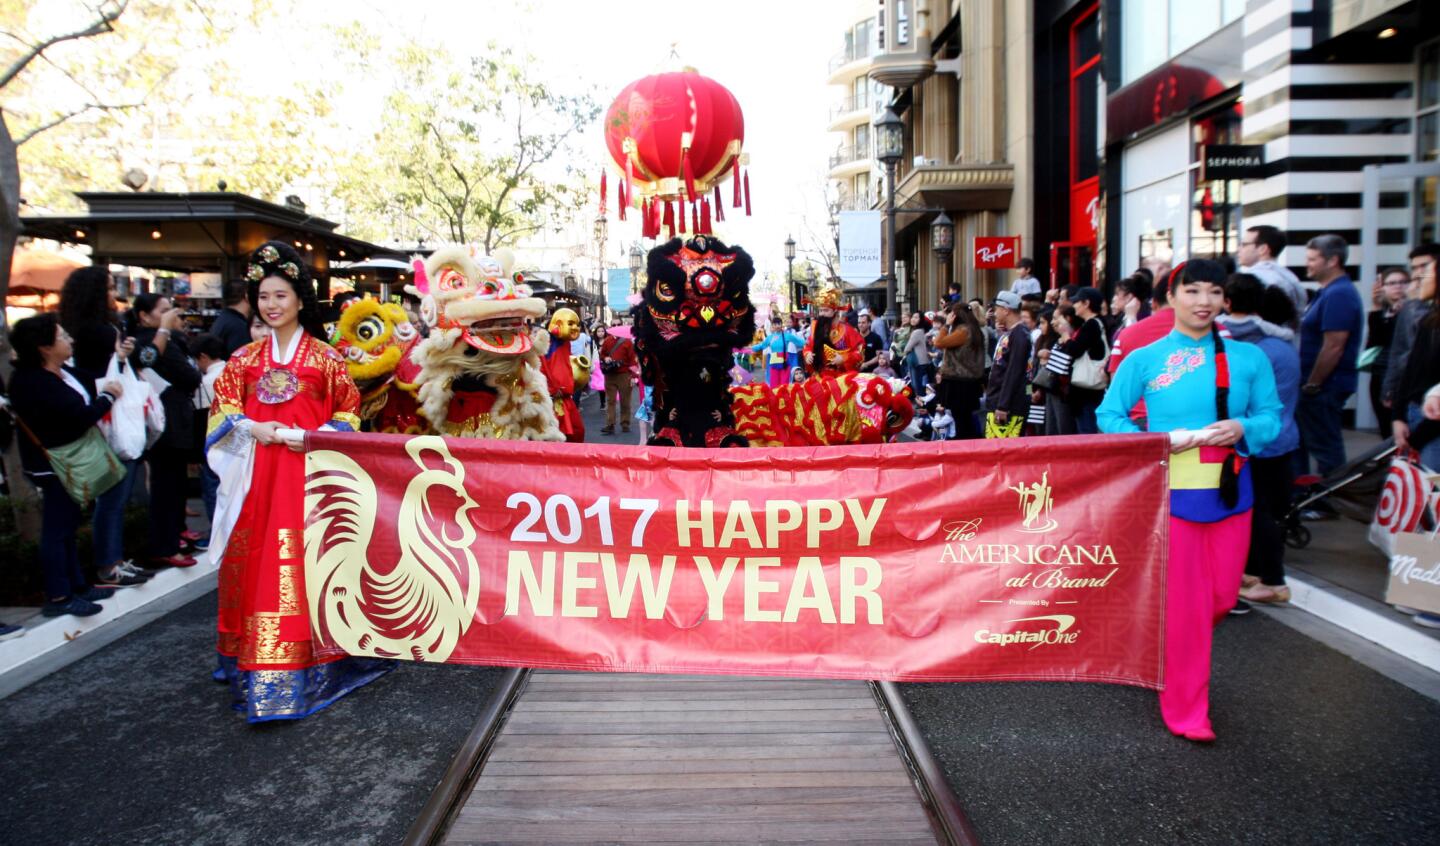 Photo Gallery: Lunar New Year celebration at the Americana at Brand